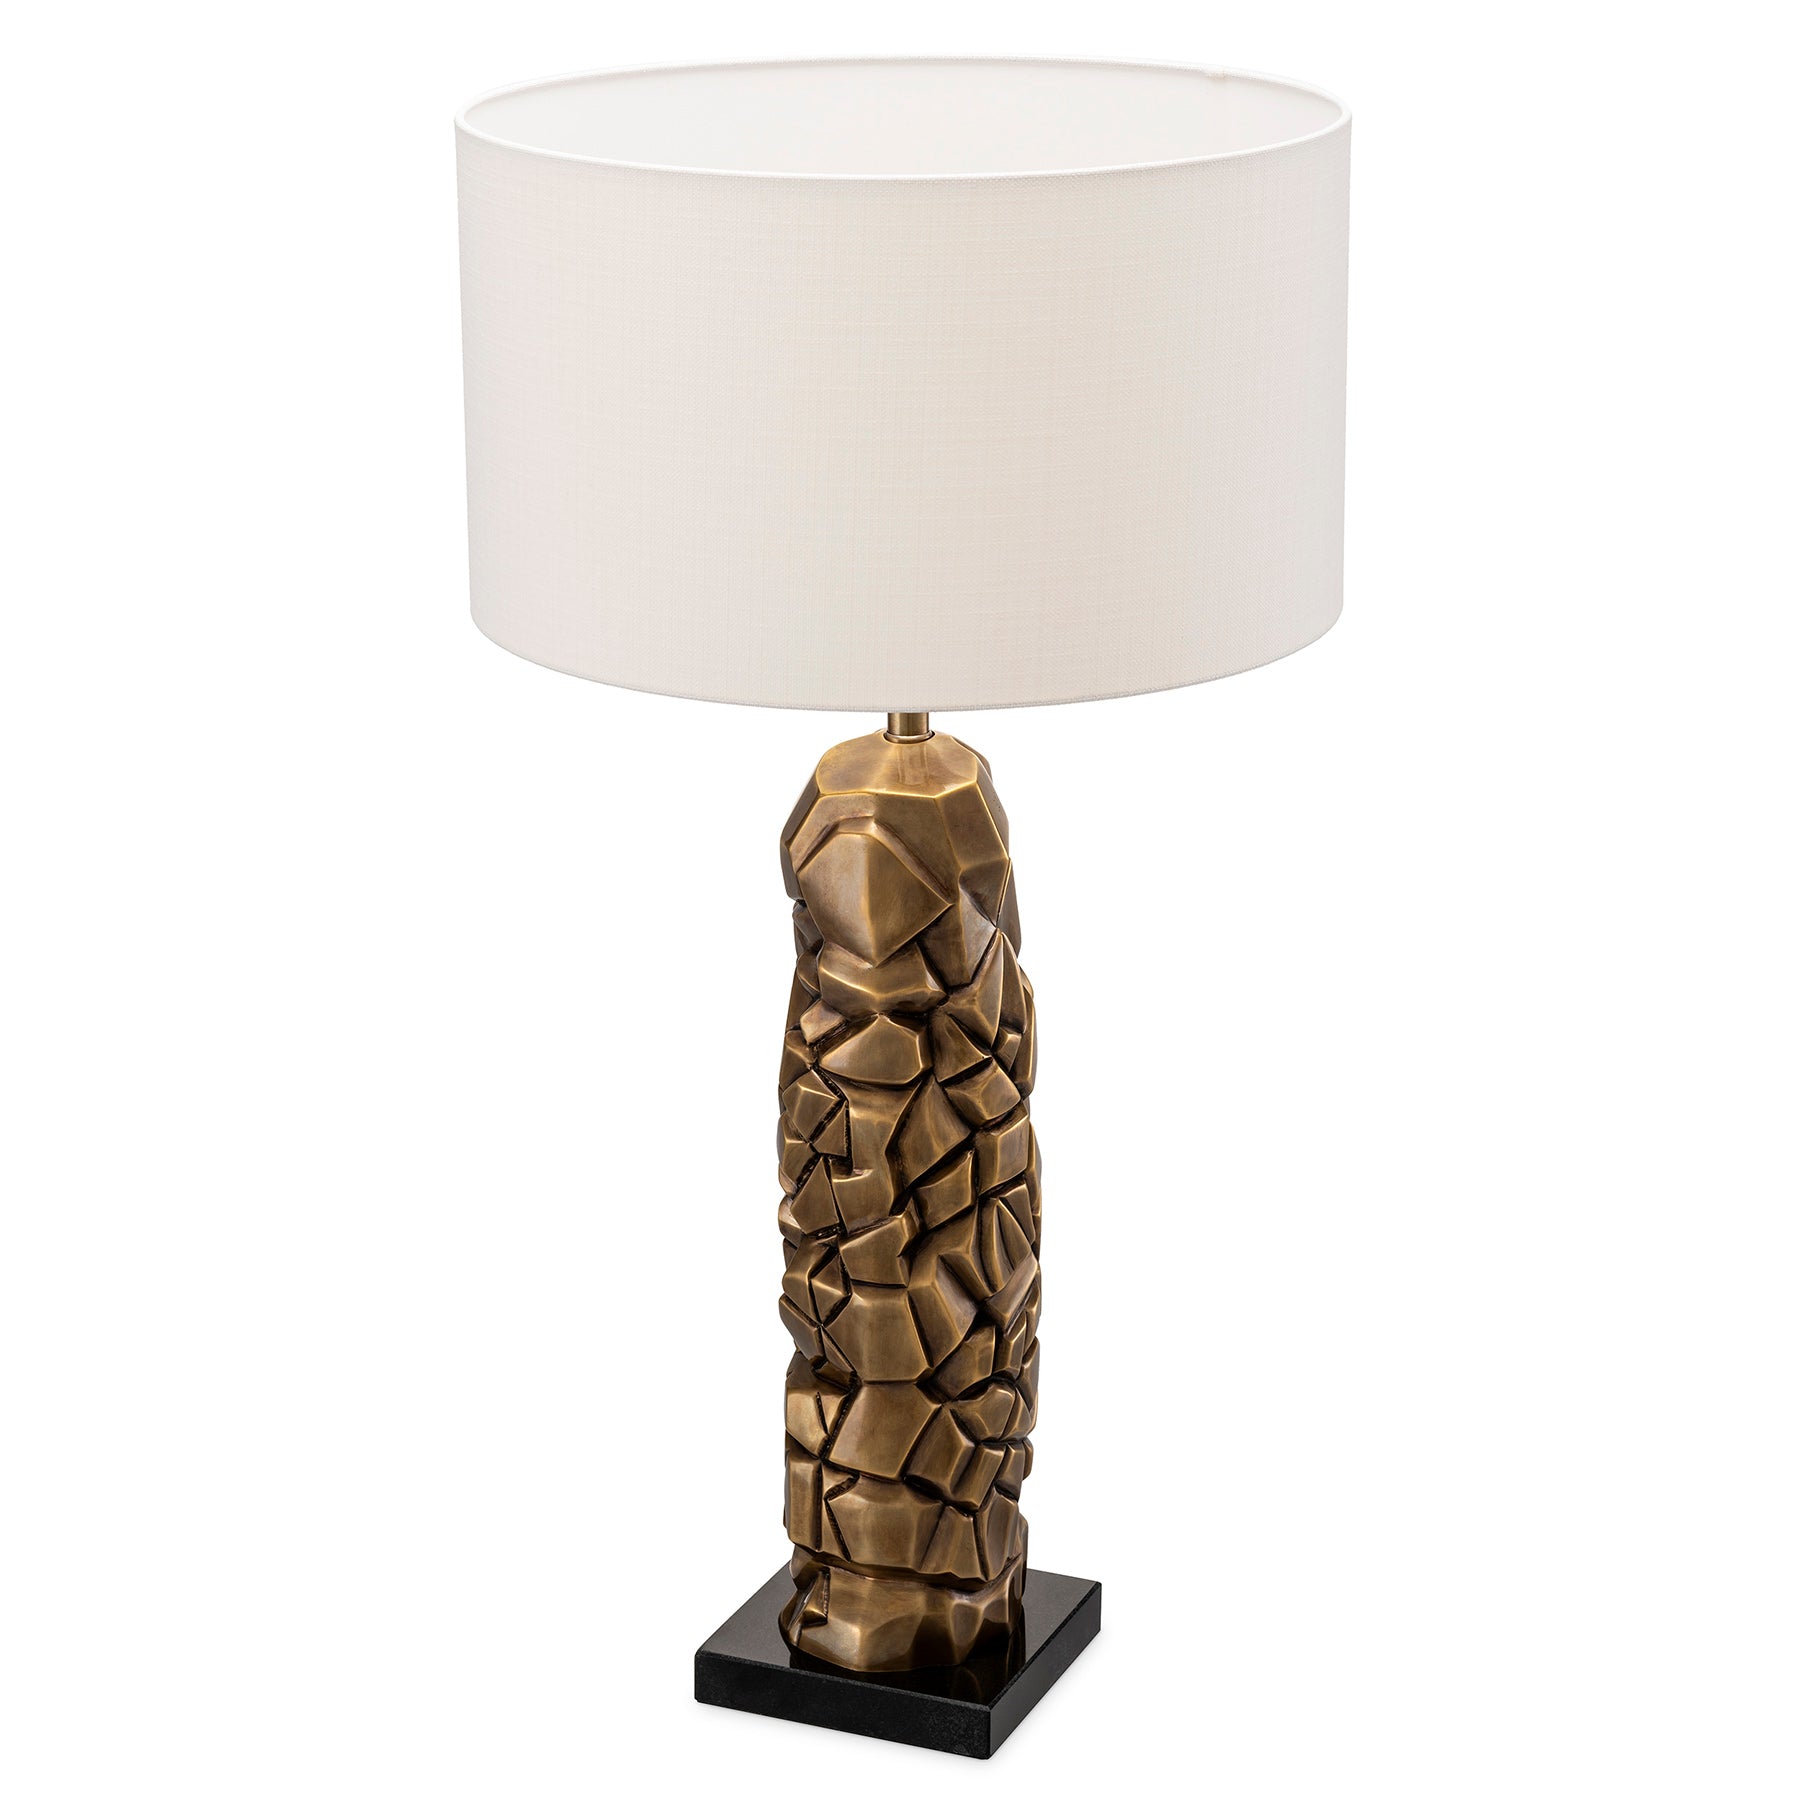 THE ROCK - Table Lamp